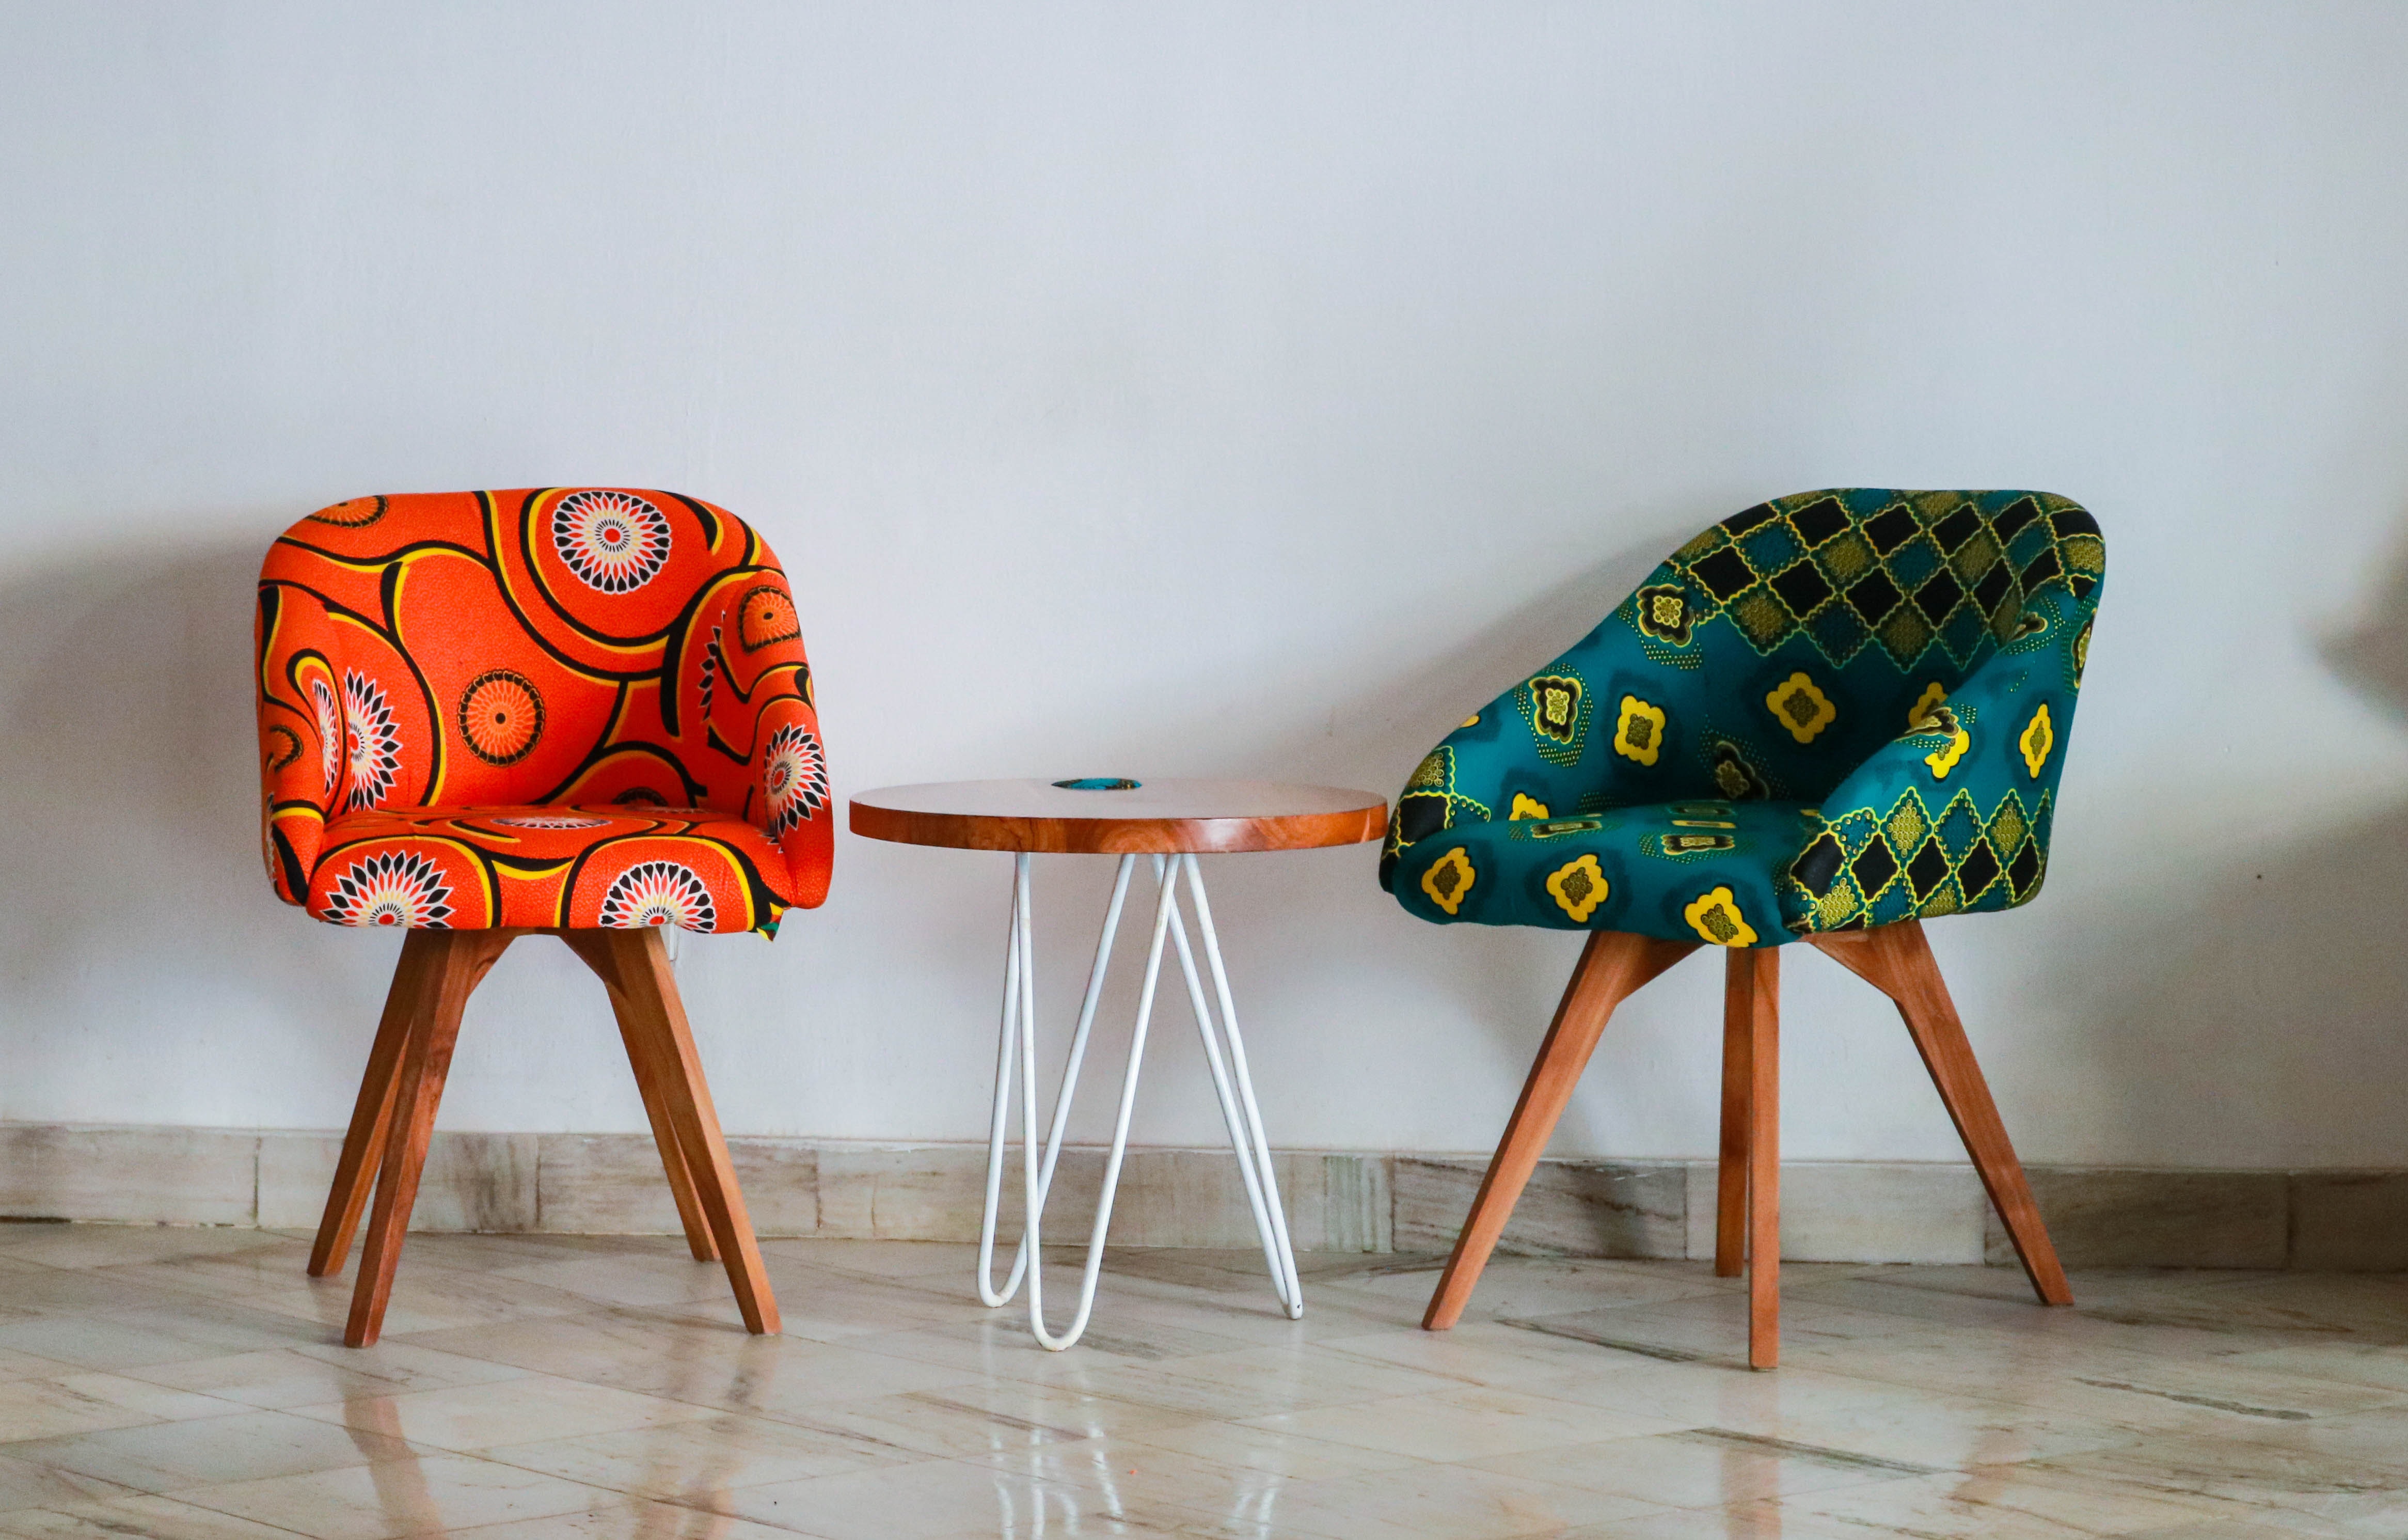 two-assorted-color-padded-chairs-near-side-table-1350789.jpg